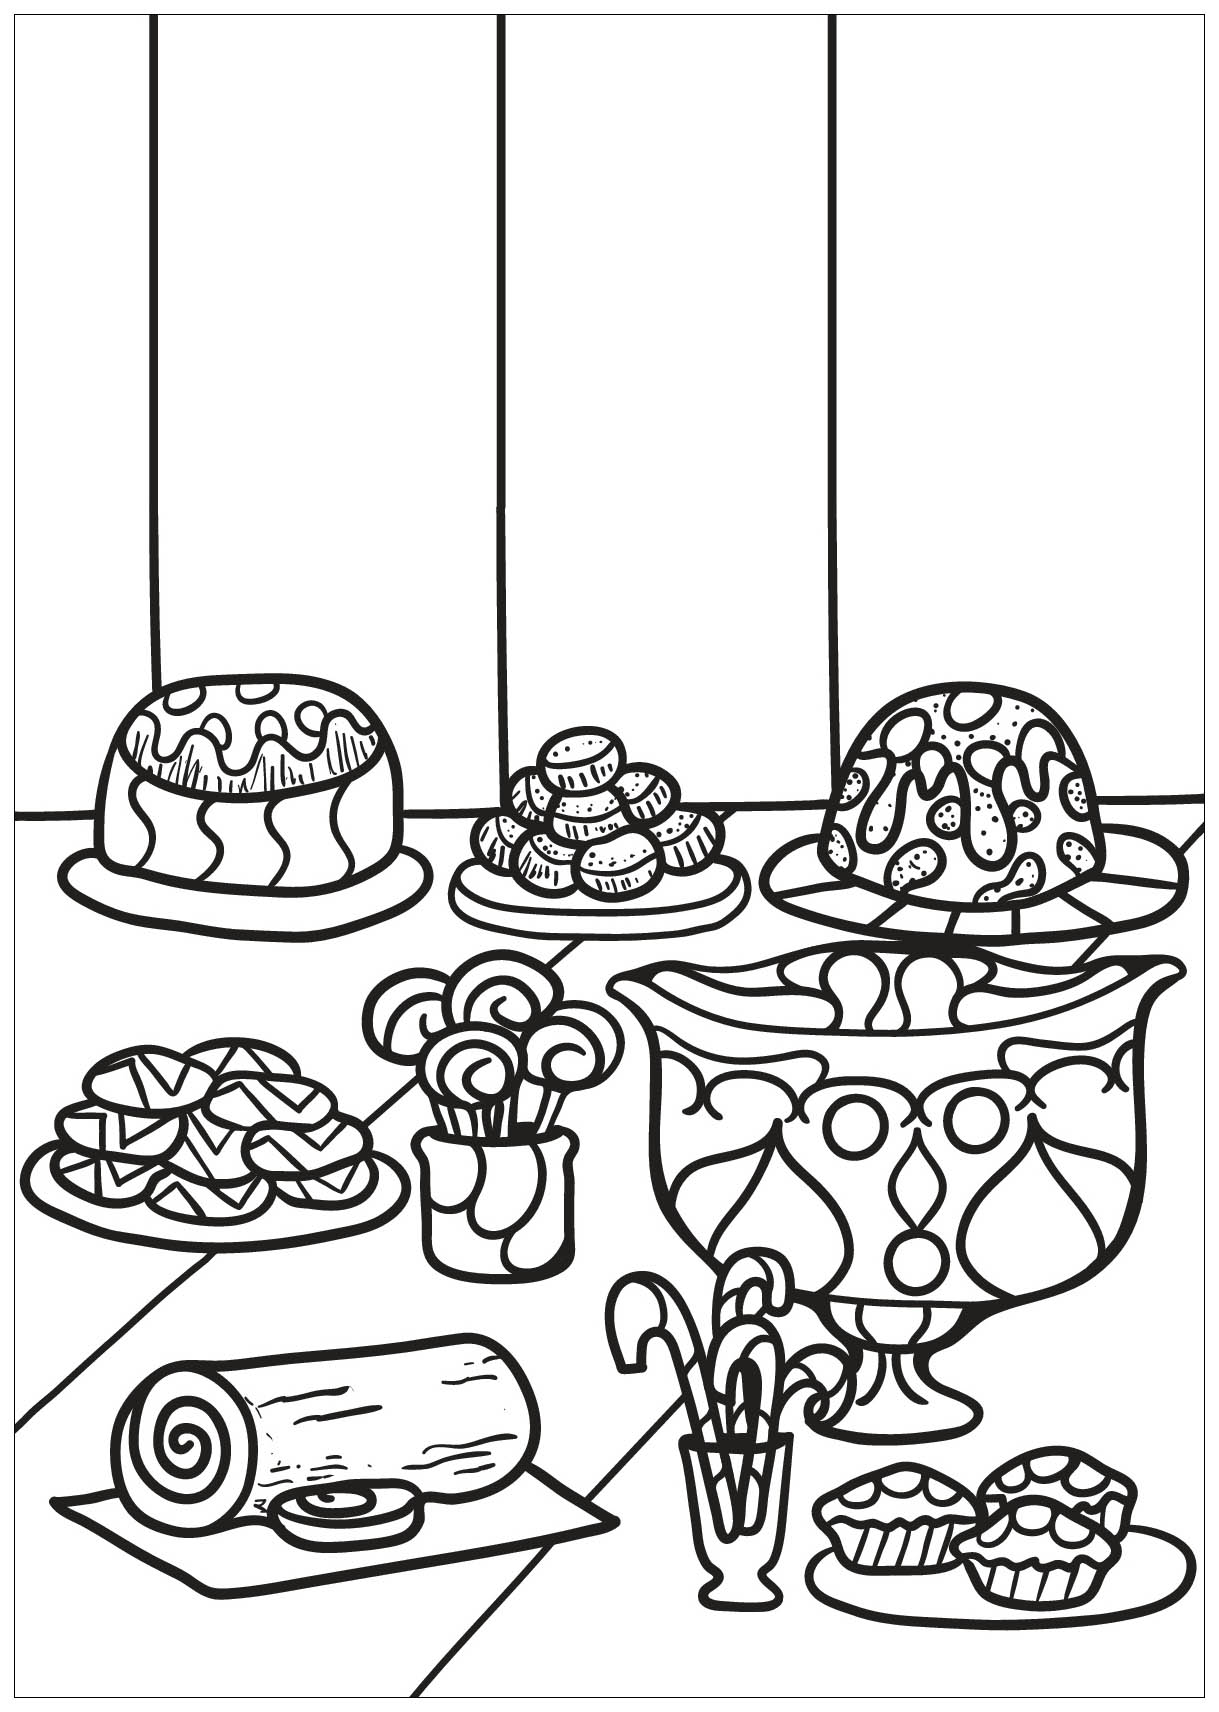 Swear Words Sweet Cupcakes Coloring Book Midnight Edition Vol.2 Black pages Flower and Cupcake for Adults coloring books 